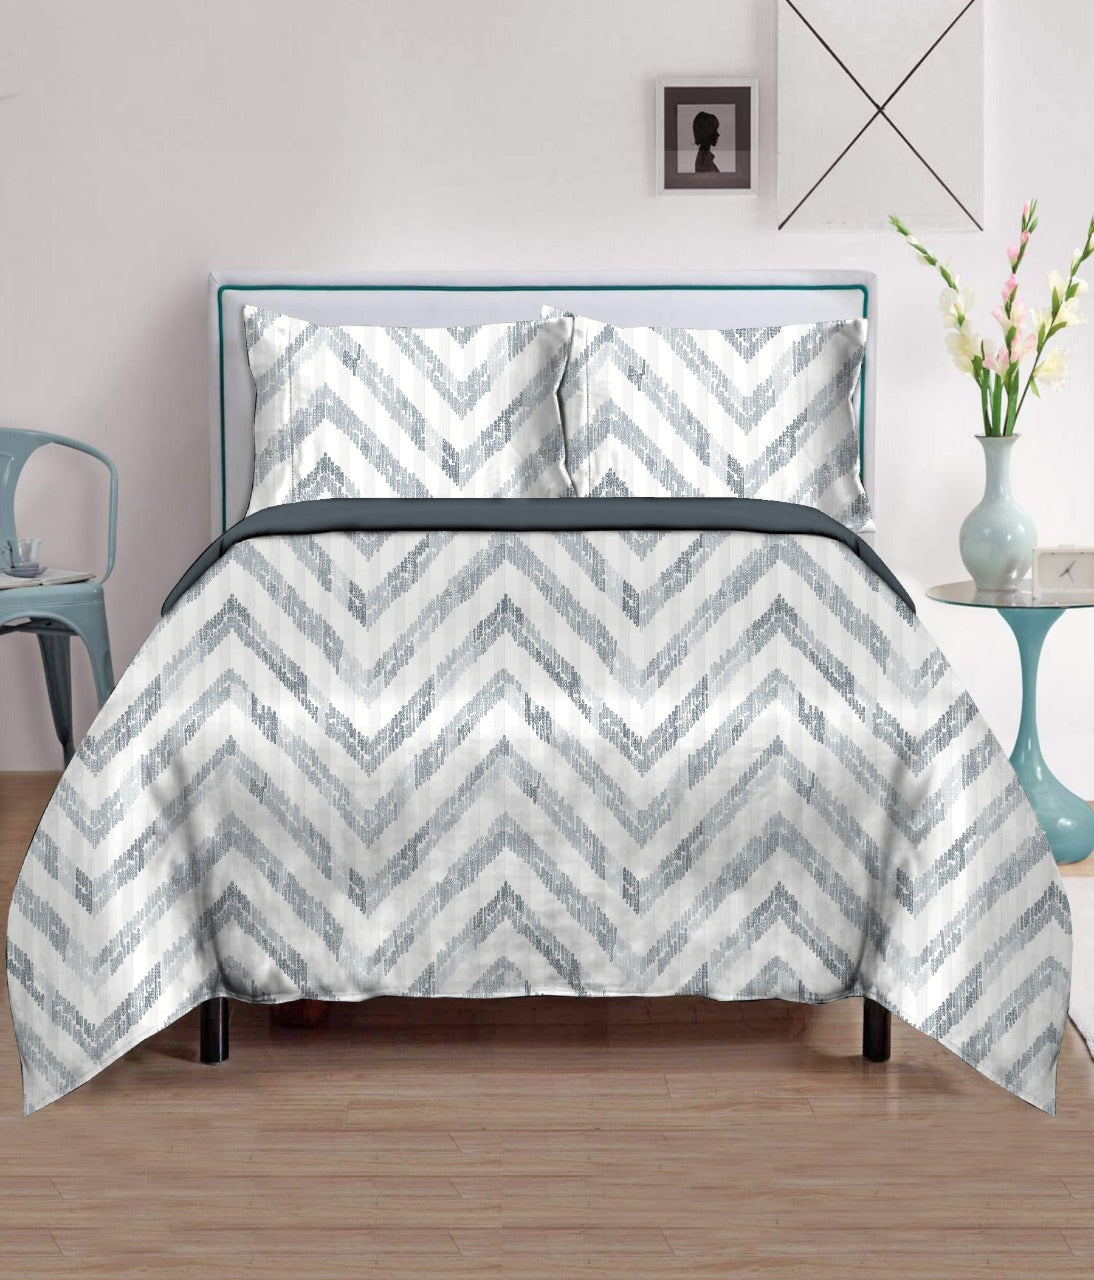 DOUBLE ZIPPERED DUVET COVER SETS!!!